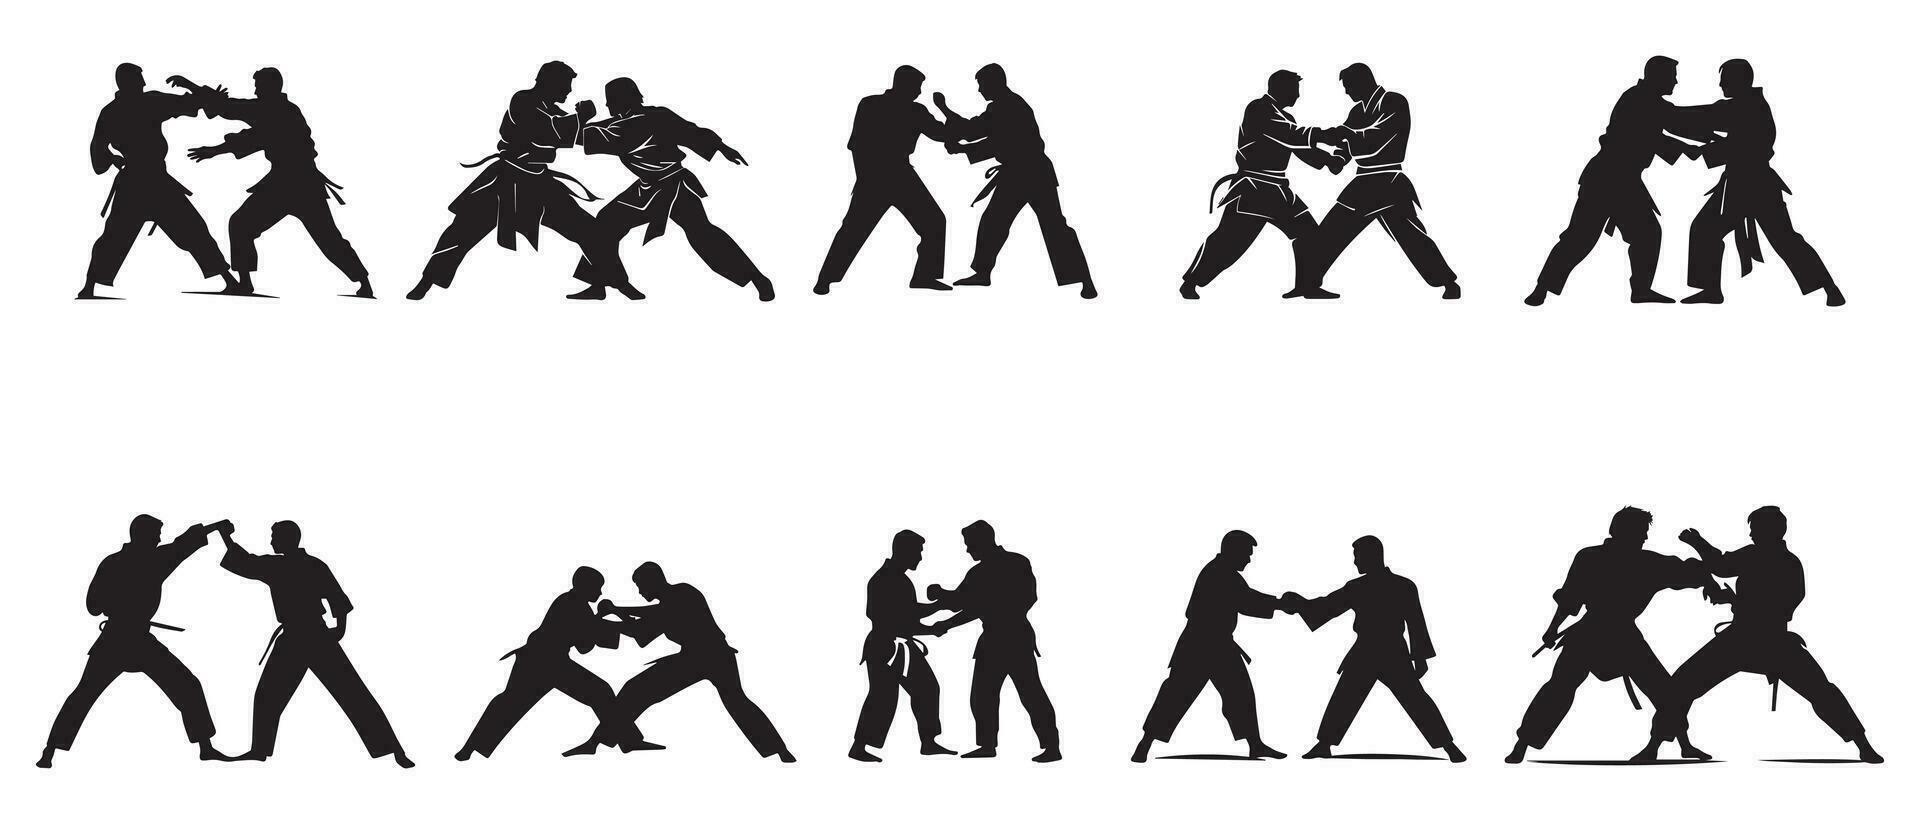 Martial arts fighter set. Silhouette of a karate man. Vector illustration.